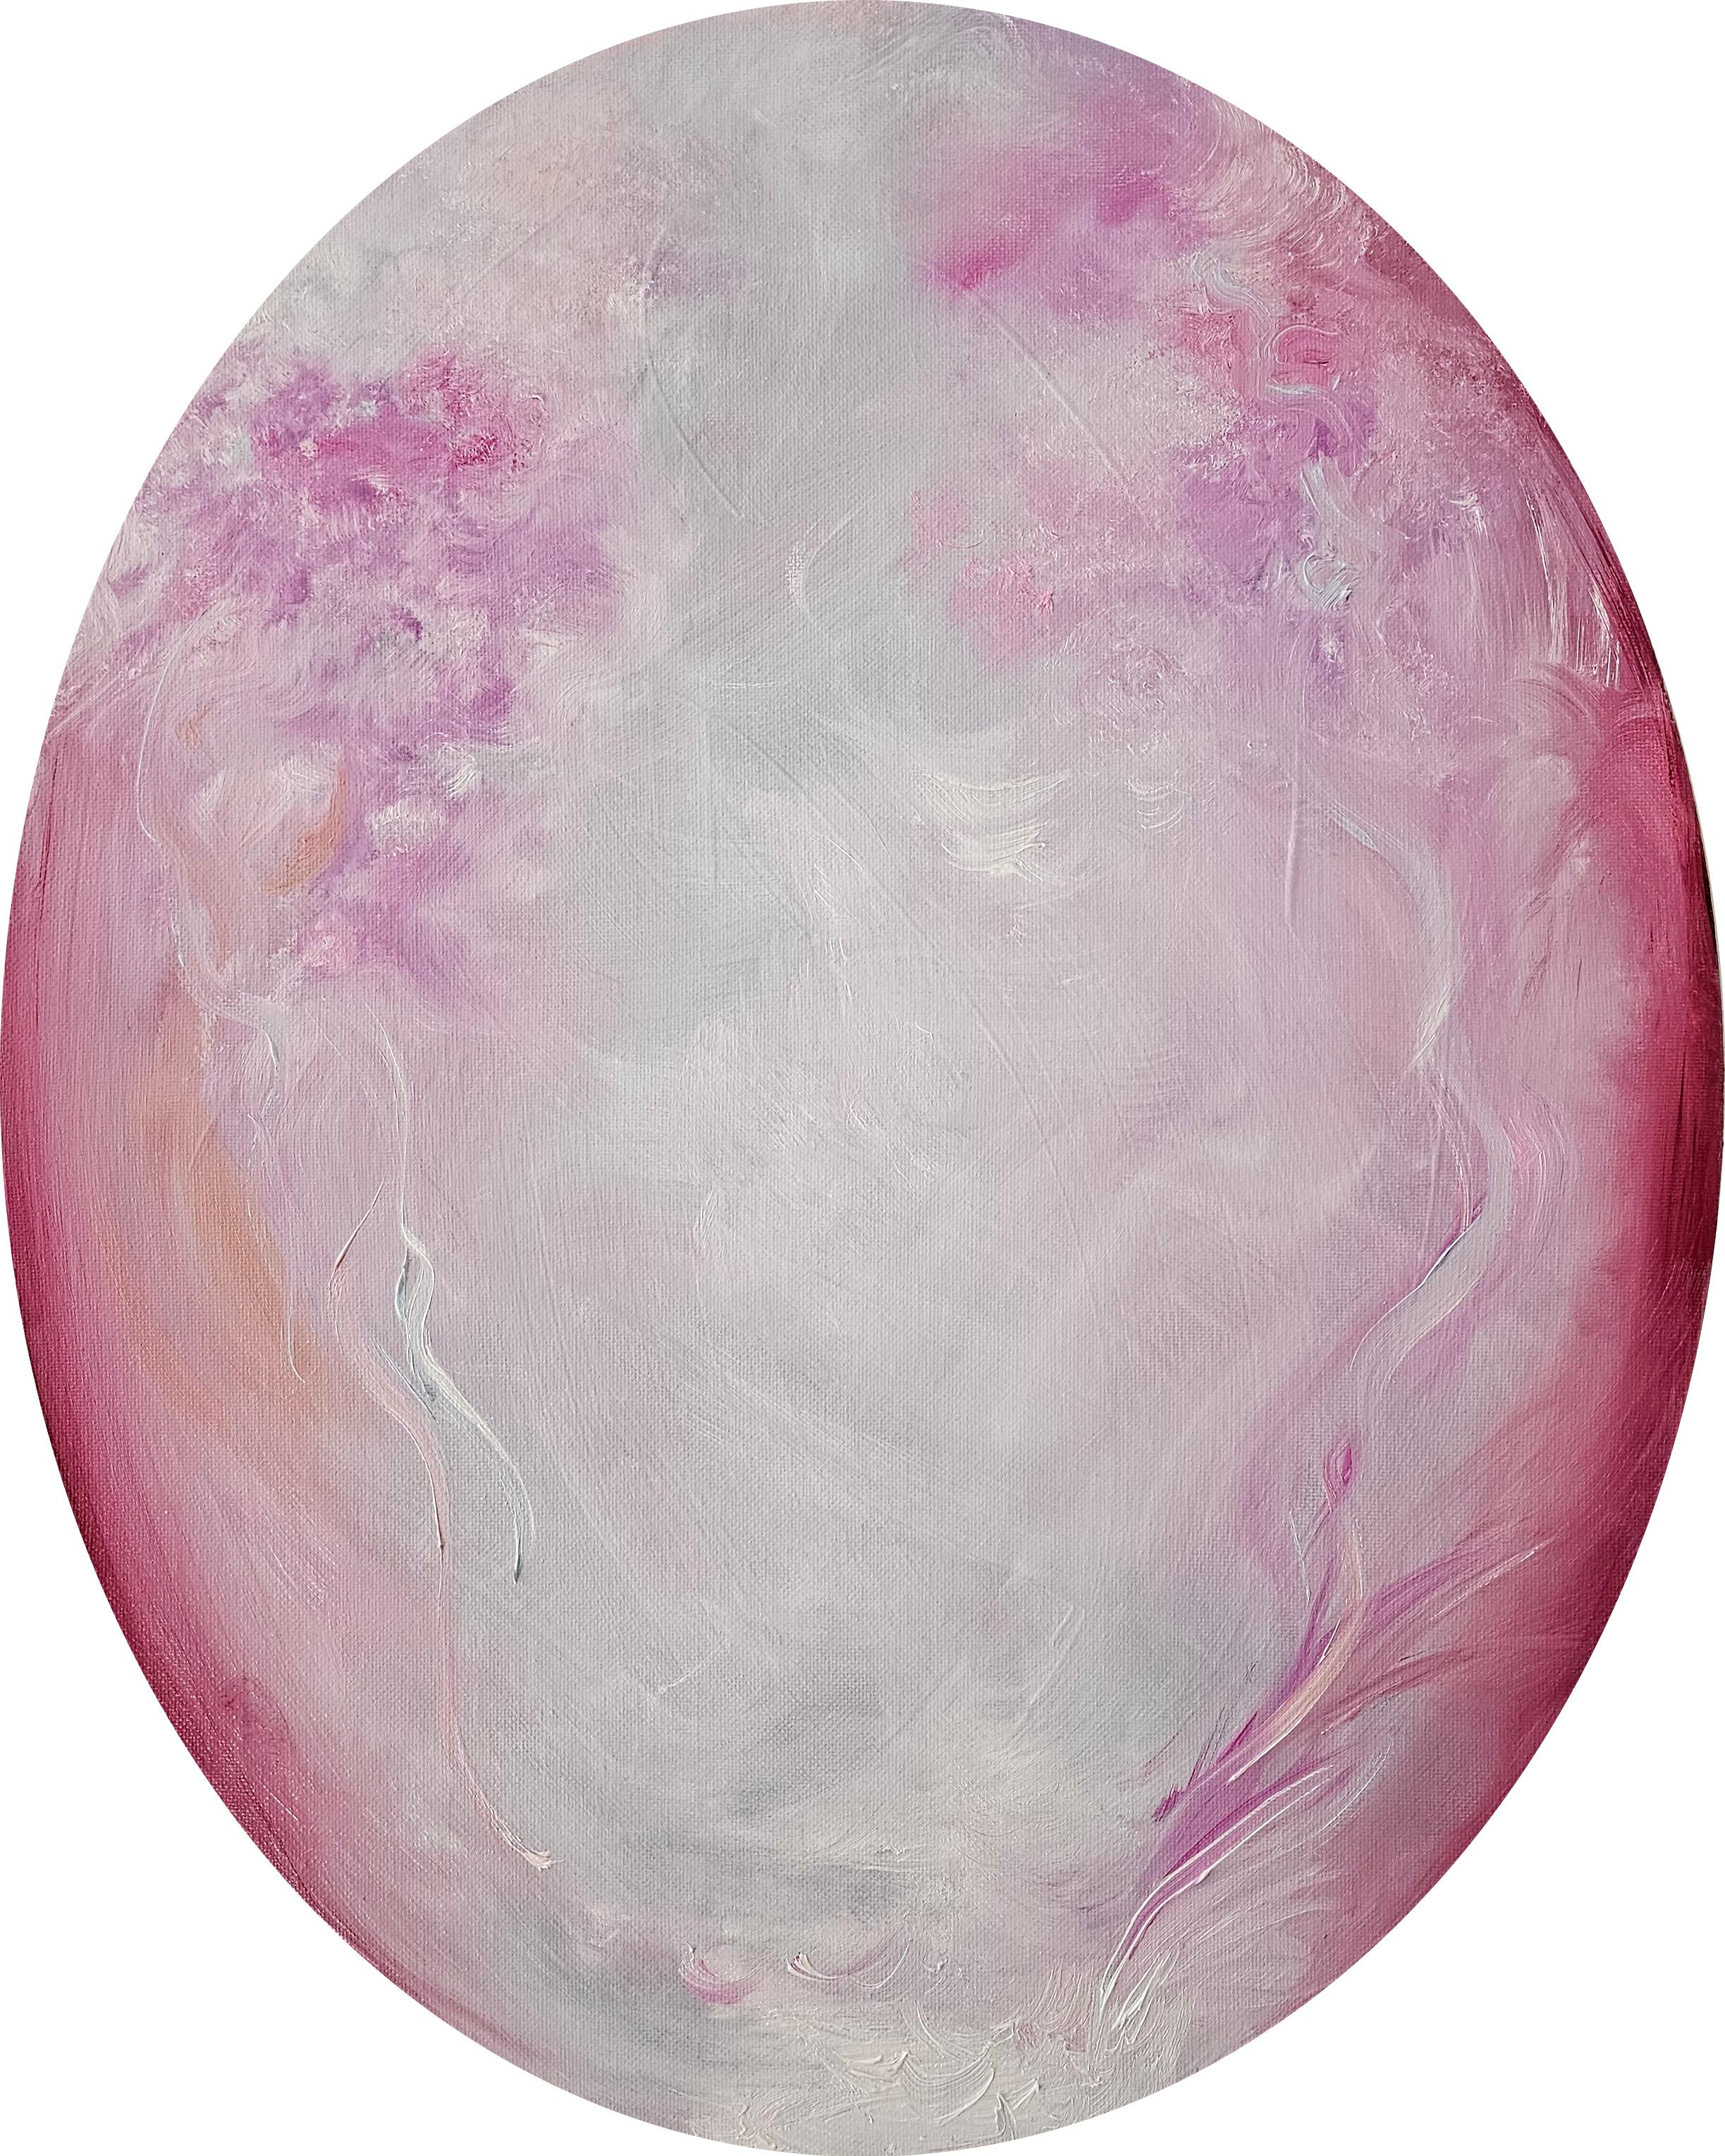 Jennifer L. Baker Abstract Painting - I fell in love - Pink oval abstract painting